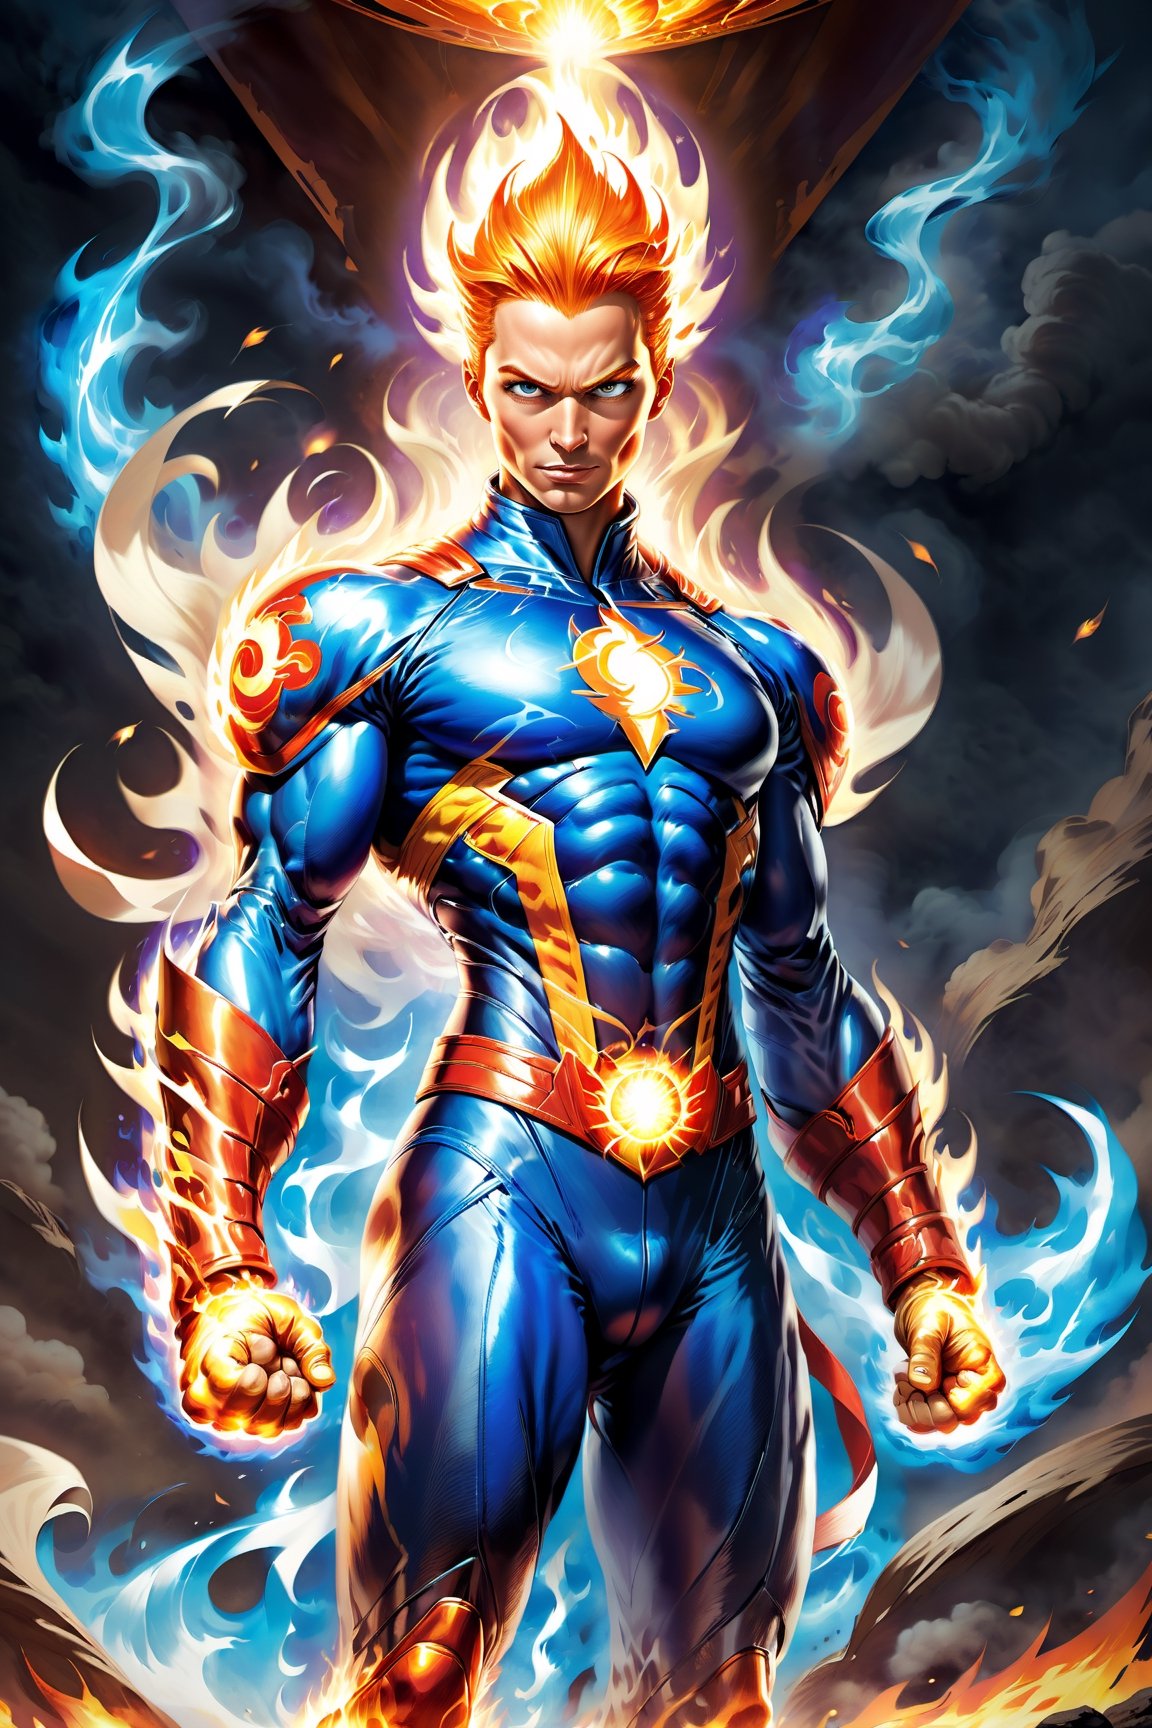 Imagine a dynamic scene featuring of iconic DC Comics character, enchantress mixed lady_human torch, heroin, superhero, fire deity, muscular, athleticism, combustion, energy, smoke, ashes. Firehair. (fire Eyes:1.6). (incandescent fireball in his hands:1.6). ((concentration of fire in her upright right hand, she is prepared to attack)). ((fire lit in the palms of his hands)). Visualize him engulfed in flames, sexy pose, very big breast, swinging, radiating with fiery intensity. ((fire-colored suit with red details)). ((His body burns with great intensity, emitting light and heat, burning in flames)). Craft a prompt for a super detailed, 16k Ultra HDR image capturing the essence of Human Torch's blazing presence – perfect face, flames, and dynamic pose. (brightness, vibe, vitality, energy, halo, halo, aura:1.5), (arms wrapped in flames, fire). flashes of fire surround his body. Choose a background that complements his character, creating a cinematic masterpiece with high realism and top-notch image quality,fire element:1.5,3d toon style,xl-shanbailing-1003fire-000010:0.6,demonictech:0.1,MagmaTech:0.1,human on fire:1.2,feh:0.4,firepunch:1.3,zeldaALBW:0.1,makioze:0.4,fire_lit_DC:0.5,DonMF1re:0.5,FireAI:0.6,Cursed energy:0.5,Sci-fi ,DonMDj1nnM4g1cXL 